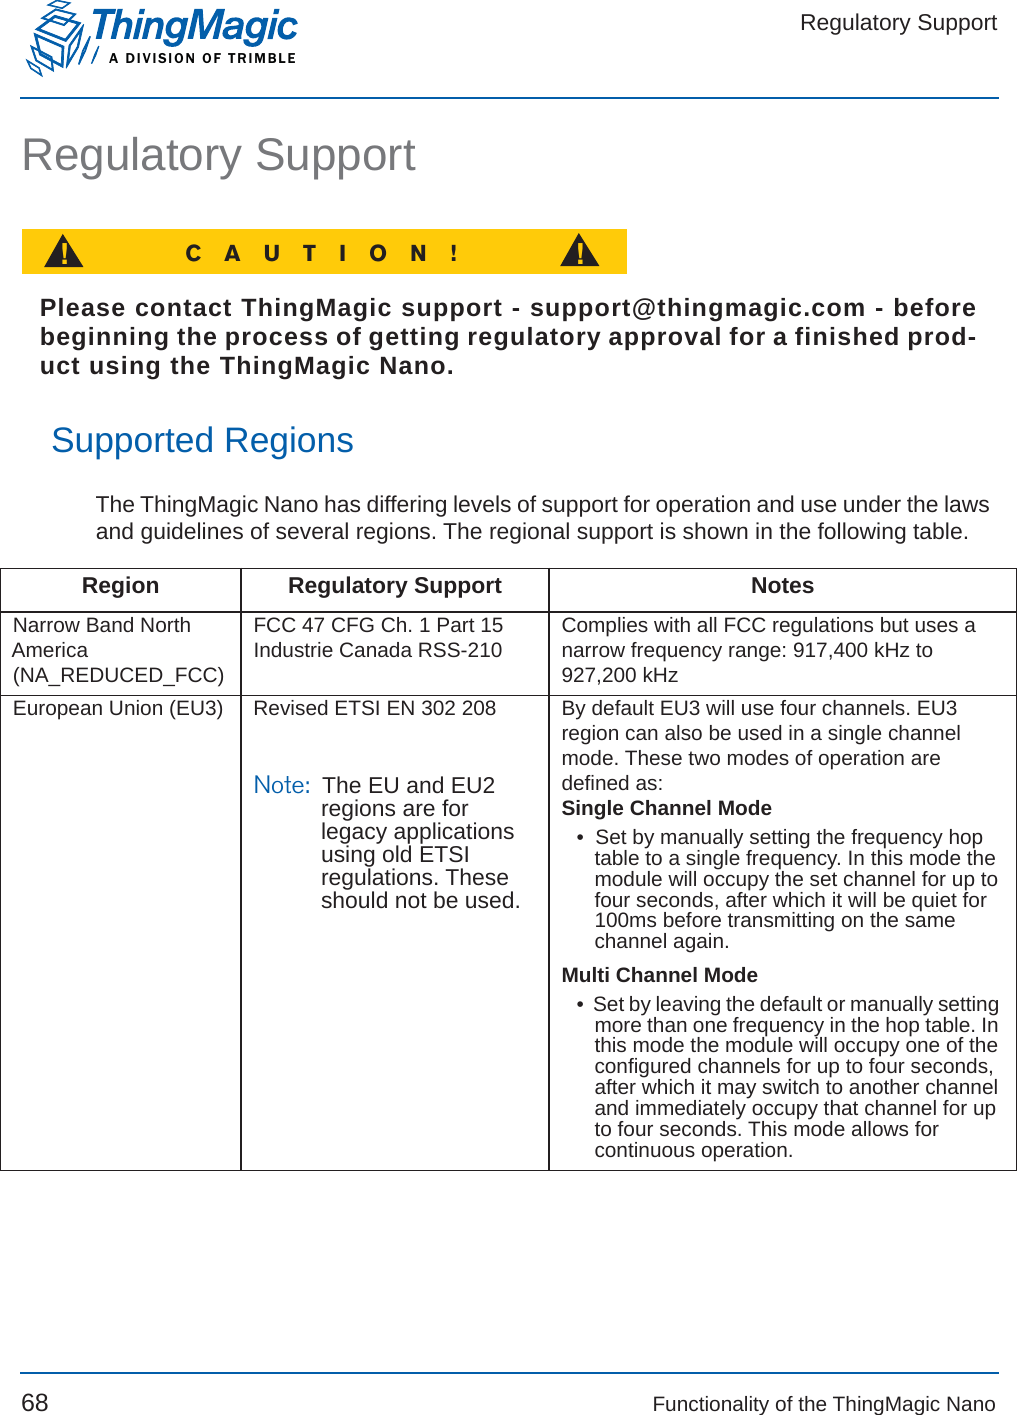 Regulatory SupportA DIVISION OF TRIMBLE68 Functionality of the ThingMagic NanoRegulatory SupportCAUTION!!!Please contact ThingMagic support - support@thingmagic.com - beforebeginning the process of getting regulatory approval for a finished prod-uct using the ThingMagic Nano.Supported RegionsThe ThingMagic Nano has differing levels of support for operation and use under the laws and guidelines of several regions. The regional support is shown in the following table.Region Regulatory Support NotesNarrow Band North America(NA_REDUCED_FCC)FCC 47 CFG Ch. 1 Part 15Industrie Canada RSS-210 Complies with all FCC regulations but uses a narrow frequency range: 917,400 kHz to 927,200 kHzEuropean Union (EU3) Revised ETSI EN 302 208Note:  The EU and EU2 regions are for legacy applications using old ETSI regulations. These should not be used.By default EU3 will use four channels. EU3 region can also be used in a single channel mode. These two modes of operation are defined as:Single Channel Mode•  Set by manually setting the frequency hop table to a single frequency. In this mode the module will occupy the set channel for up to four seconds, after which it will be quiet for 100ms before transmitting on the same channel again.Multi Channel Mode•  Set by leaving the default or manually setting more than one frequency in the hop table. In this mode the module will occupy one of the configured channels for up to four seconds, after which it may switch to another channel and immediately occupy that channel for up to four seconds. This mode allows for continuous operation.